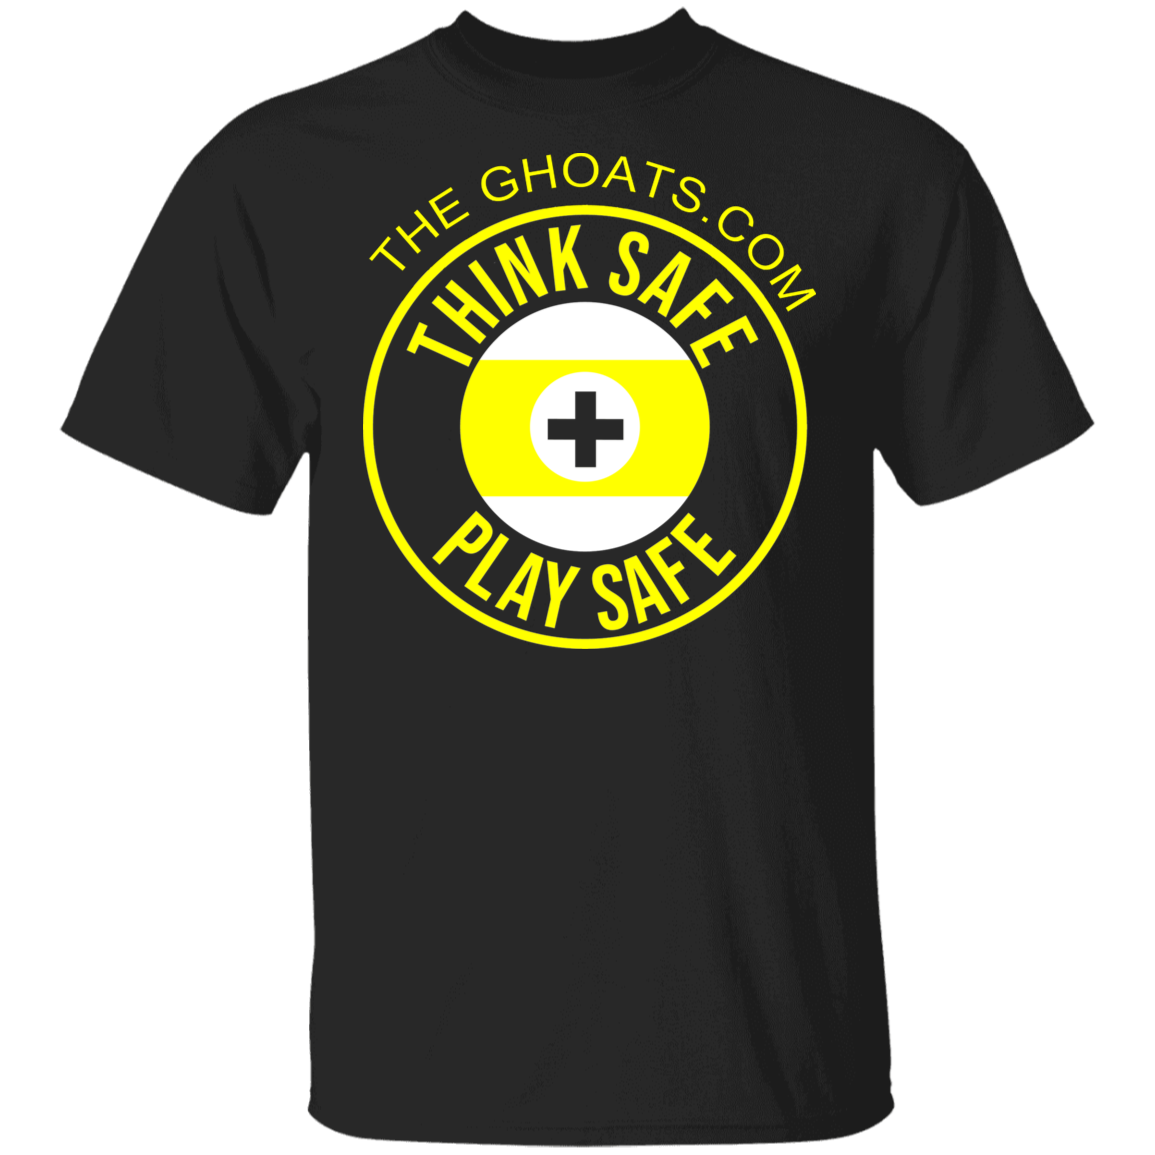 The GHOATS Custom Design. #31 Think Safe. Play Safe. Youth Basic 100% Cotton T-Shirt